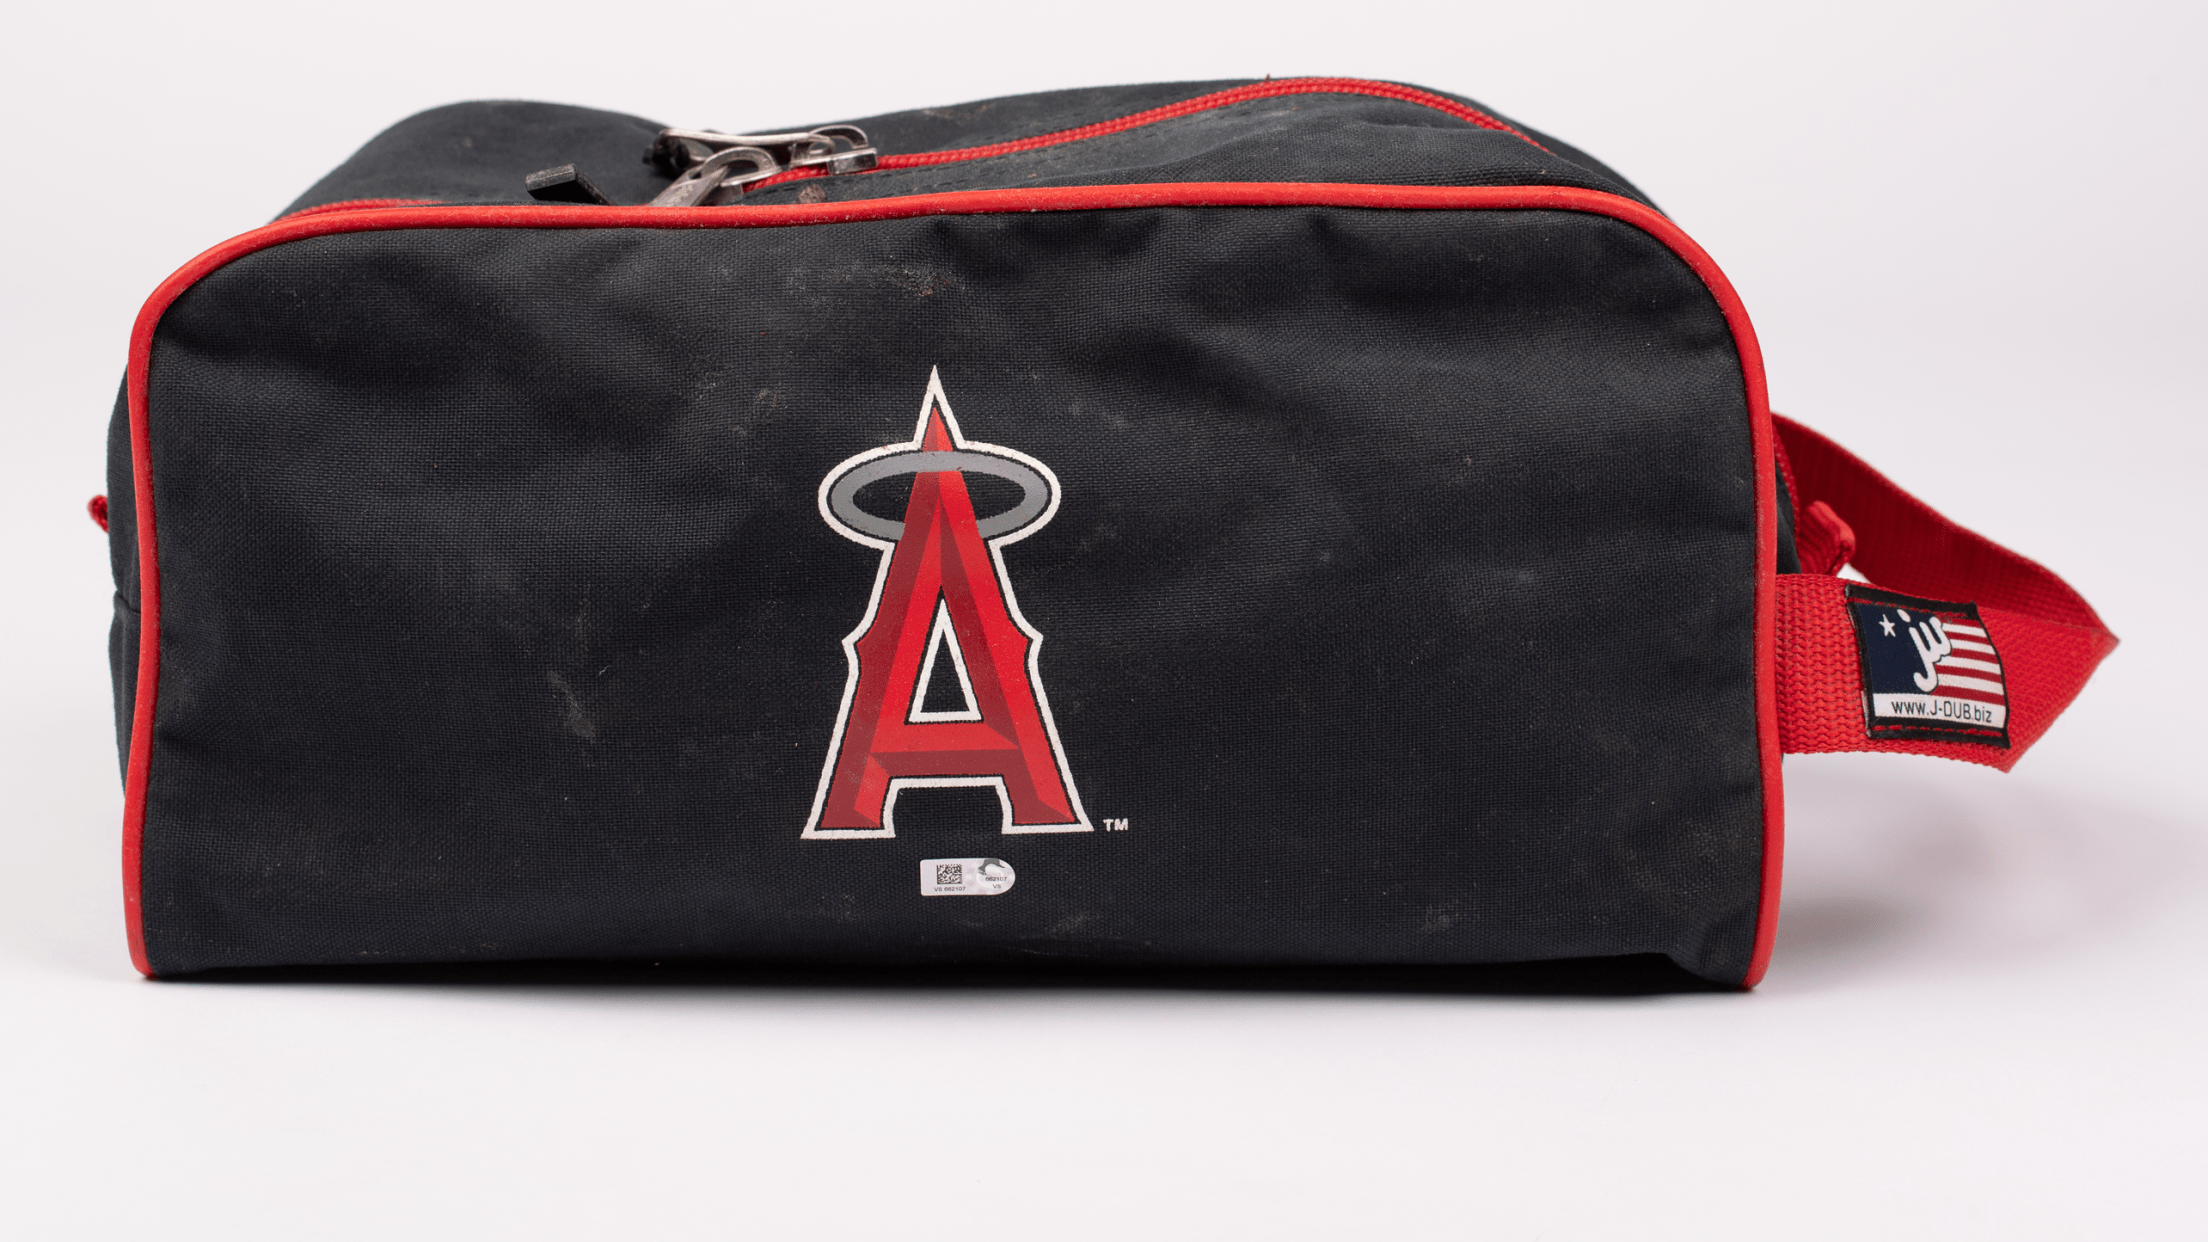 Los Angeles Angels on X: The Angels & Legends previewed new culinary  & merchandise offerings #AtTheBigA for the 2019 season. New arrivals  include delicious menu additions, including player-inspired selections, as  well as